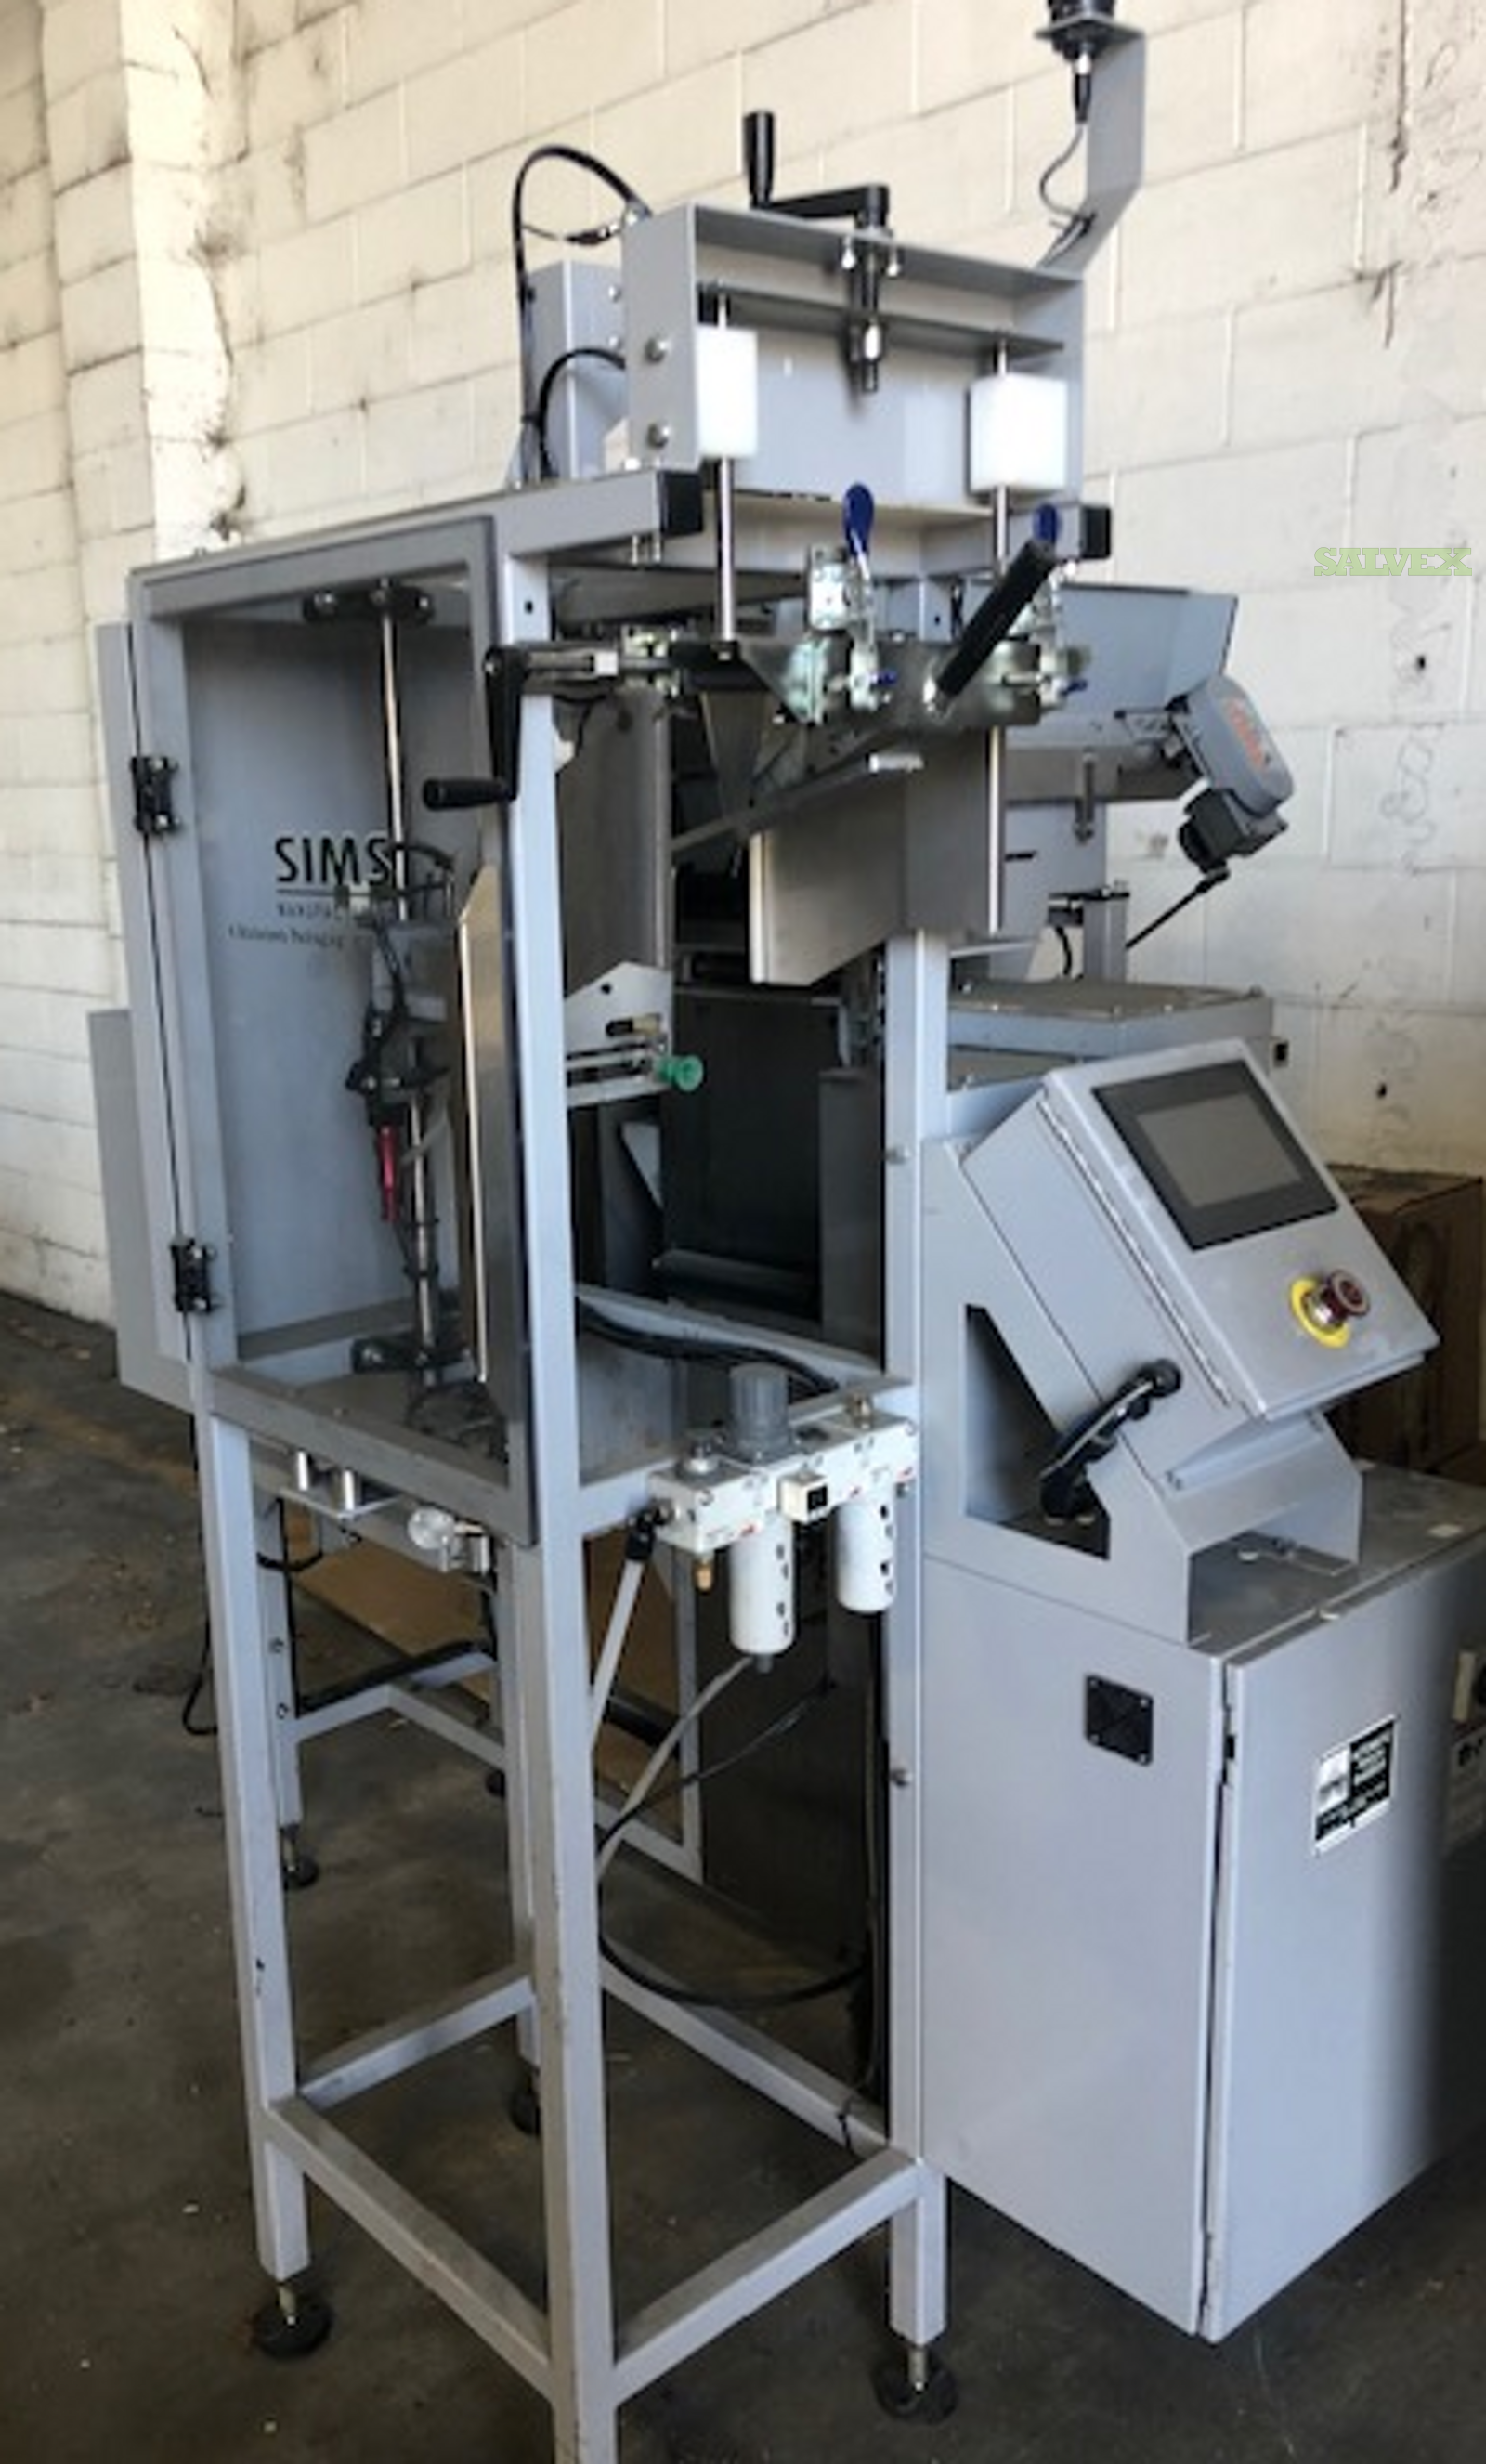 Various Packaging Machines Punnet Tray Filling Machine, Automatic Pouch Bagger, Automatic Random Taper, Blower, Scale Fillers, Heat Transfer Unit, etc. (14 Units)